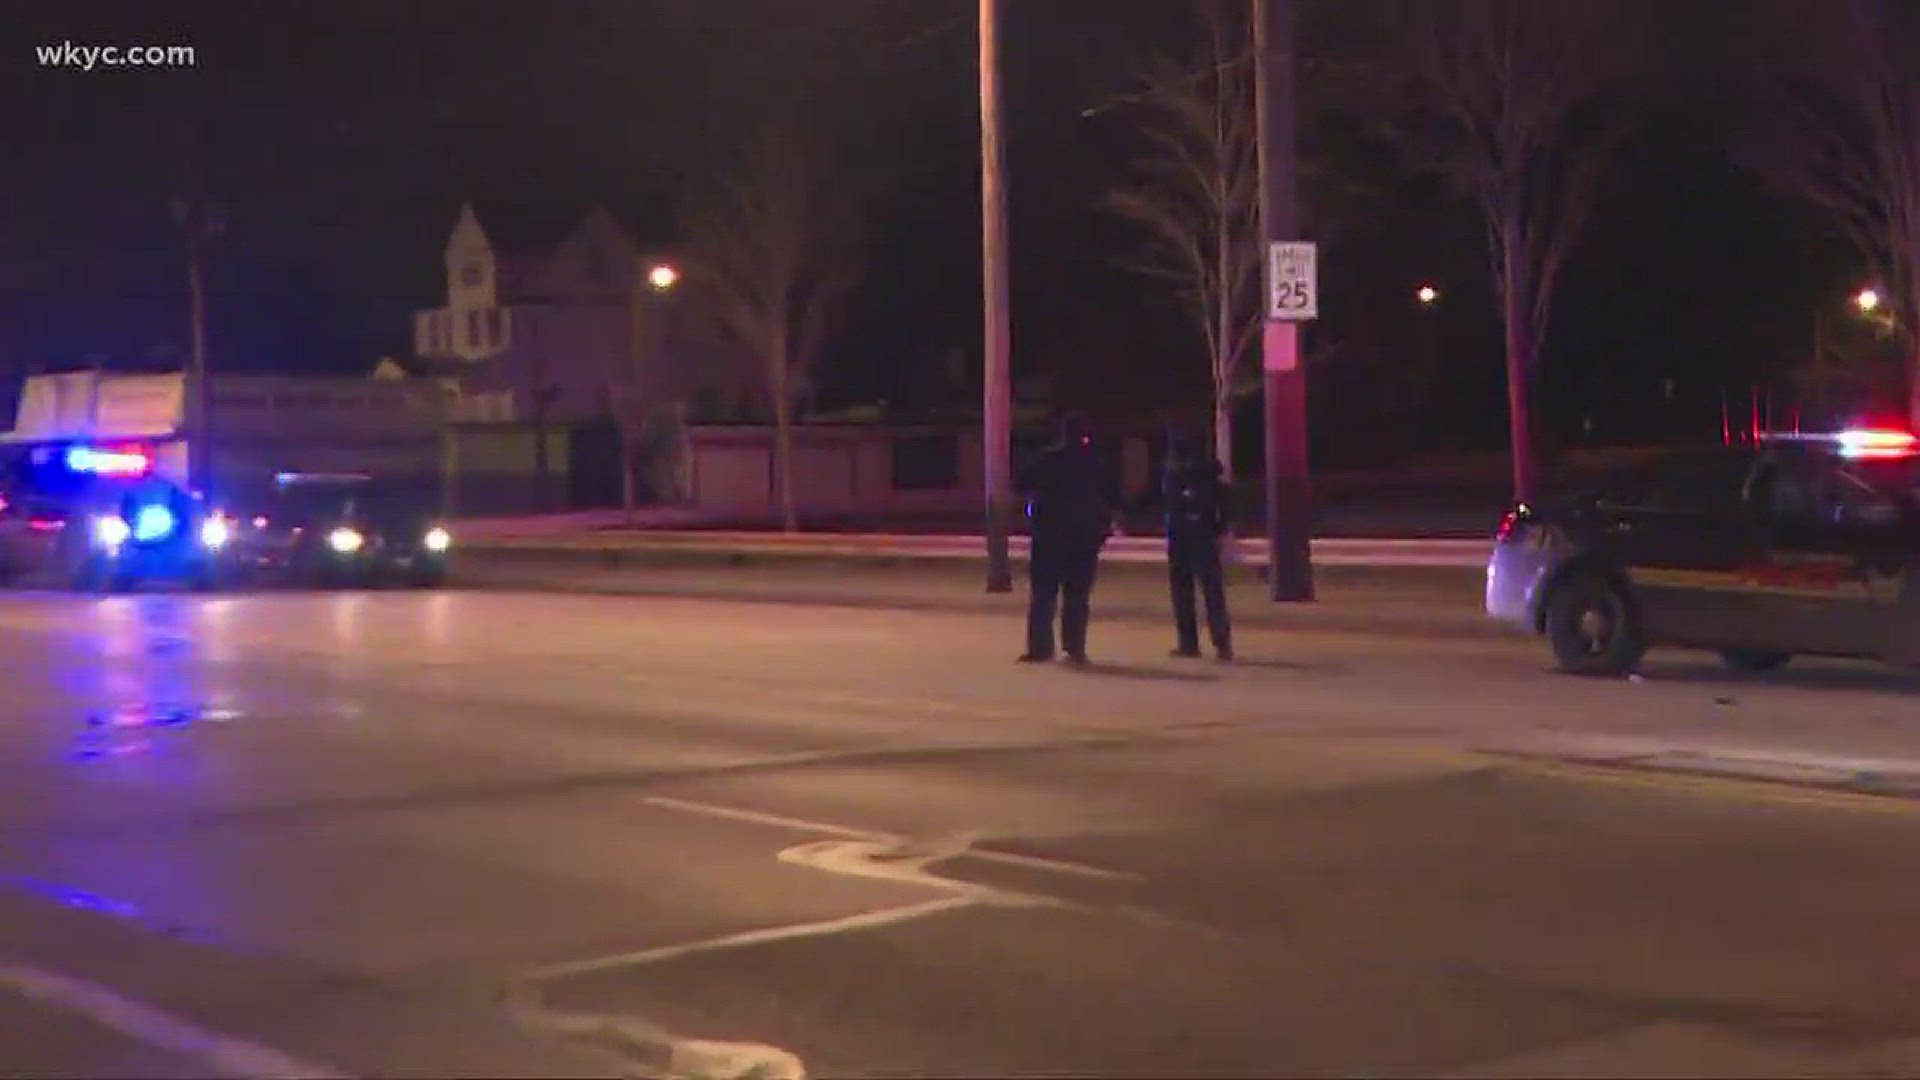 14-year-old struck by car during police chase on Cleveland's east side